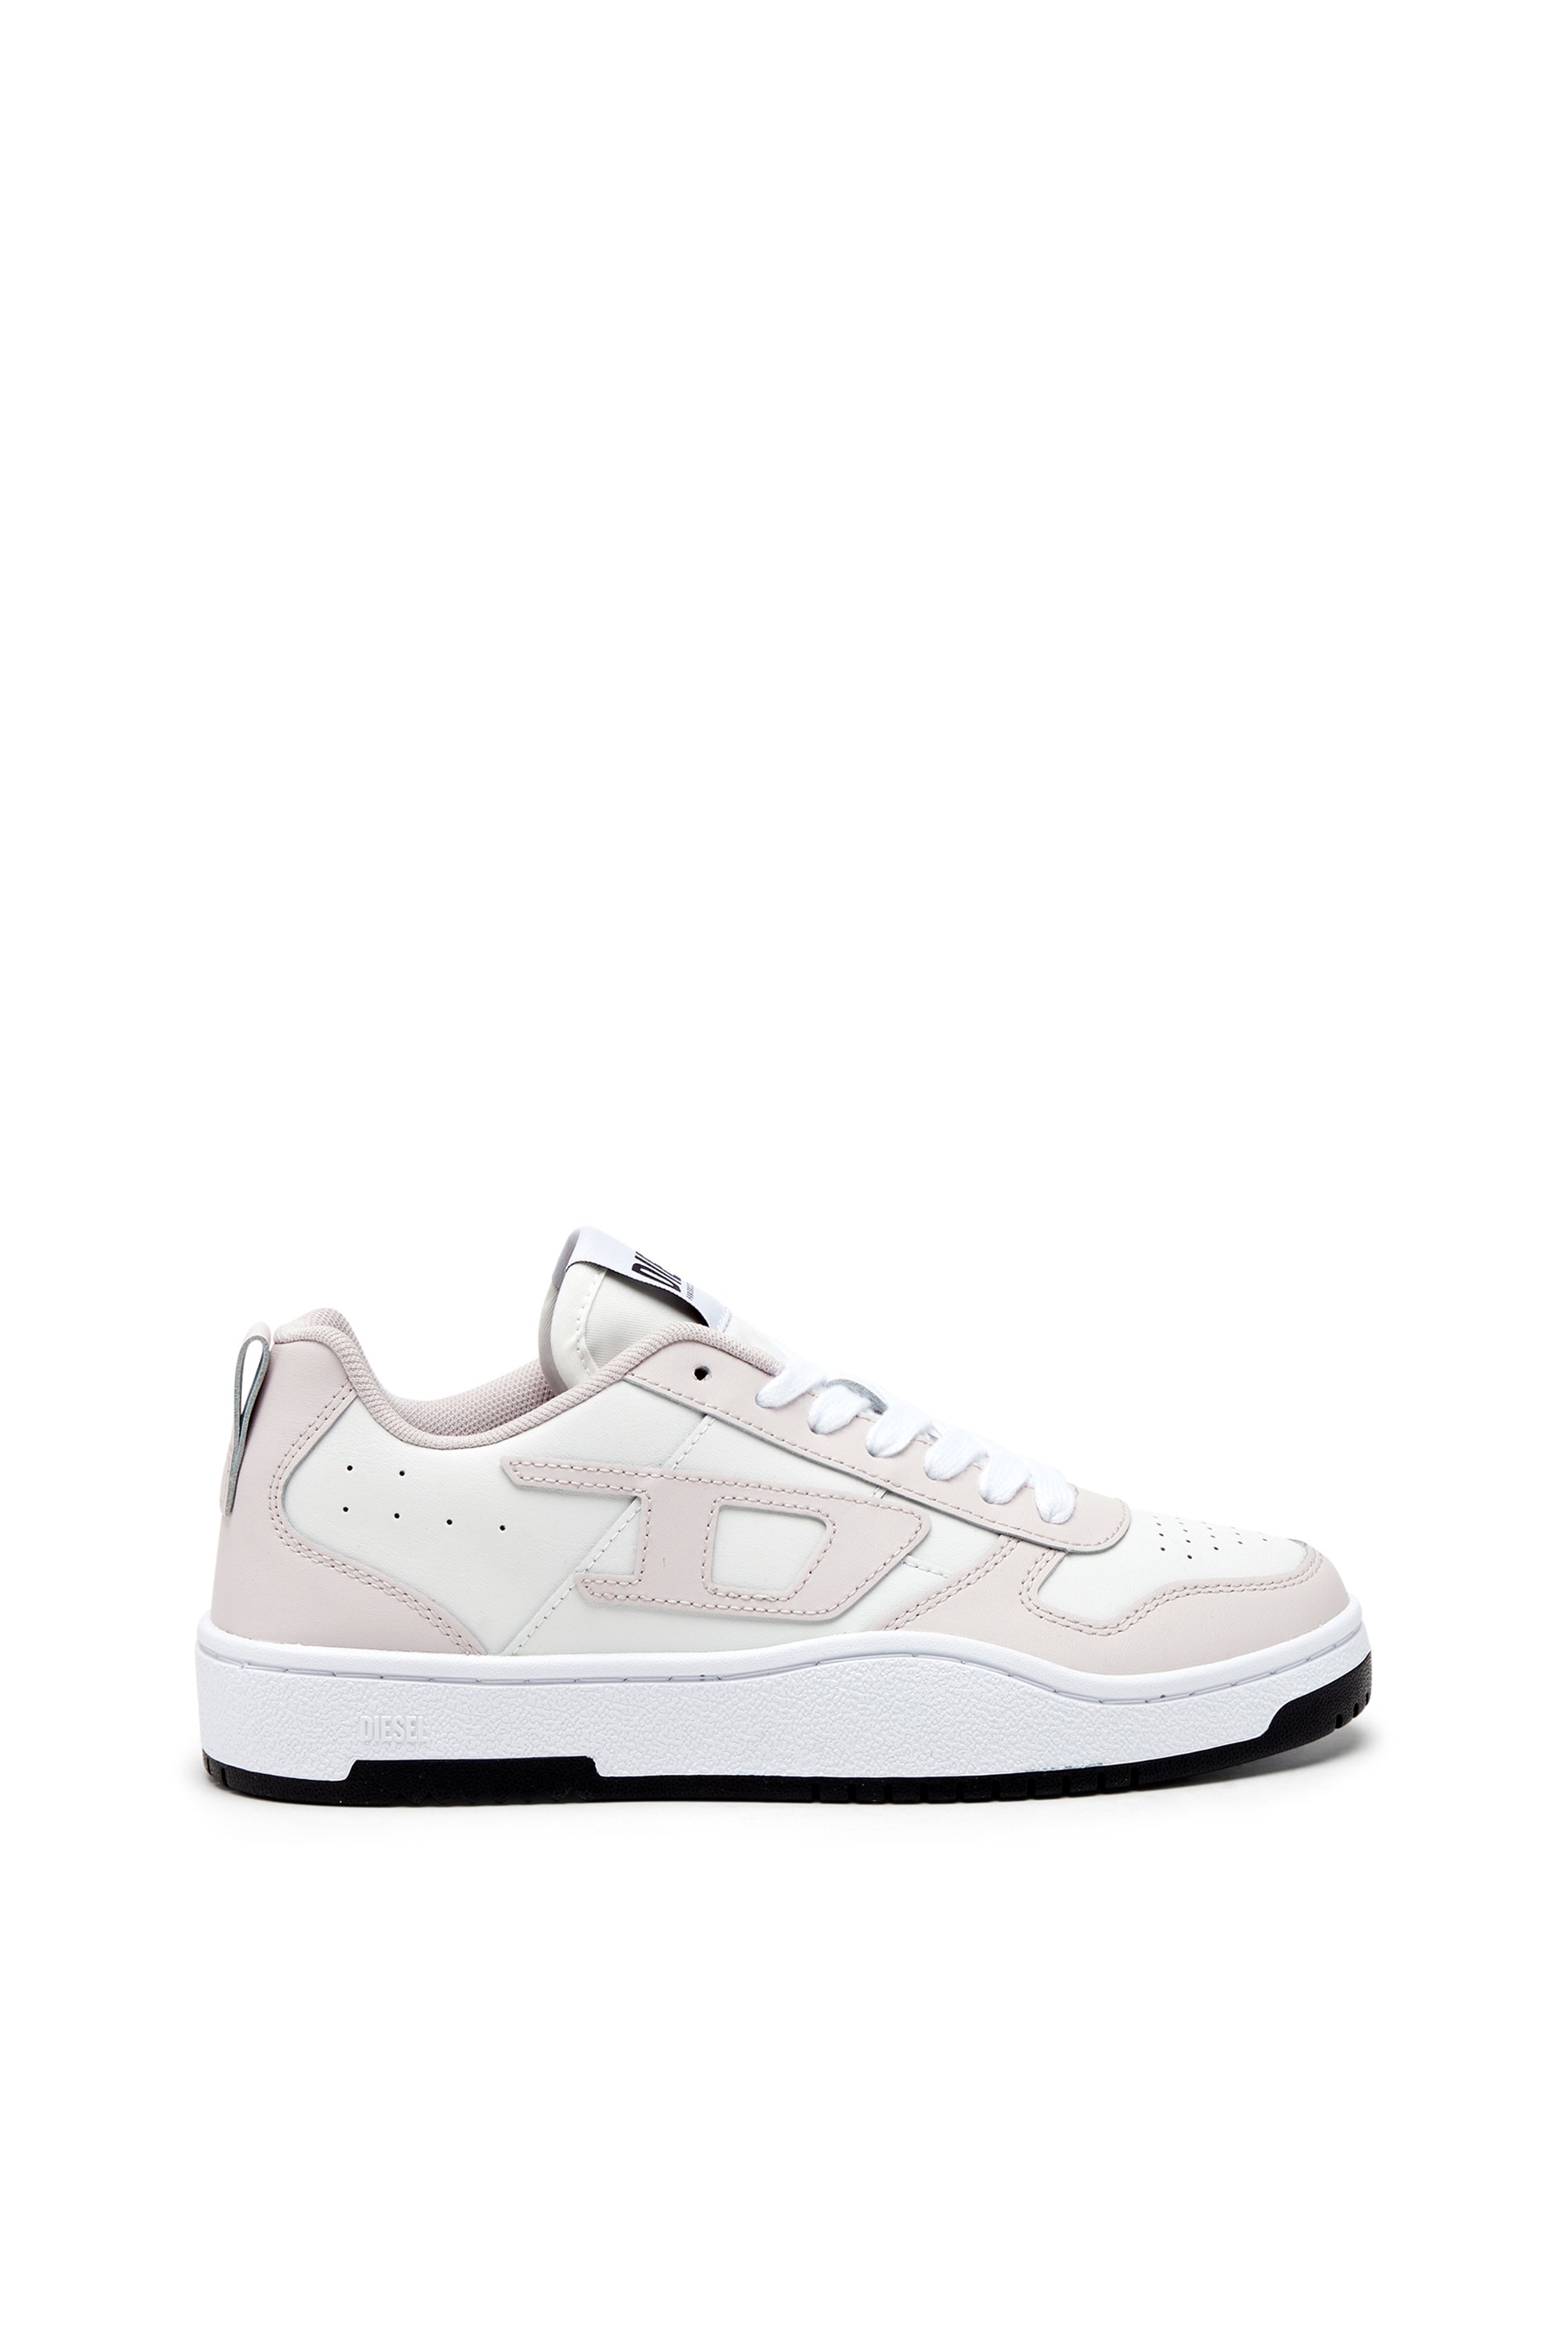 Diesel - S-UKIYO V2 LOW W, Woman S-Ukiyo Low-Low-top sneakers in leather and nylon in Multicolor - Image 1